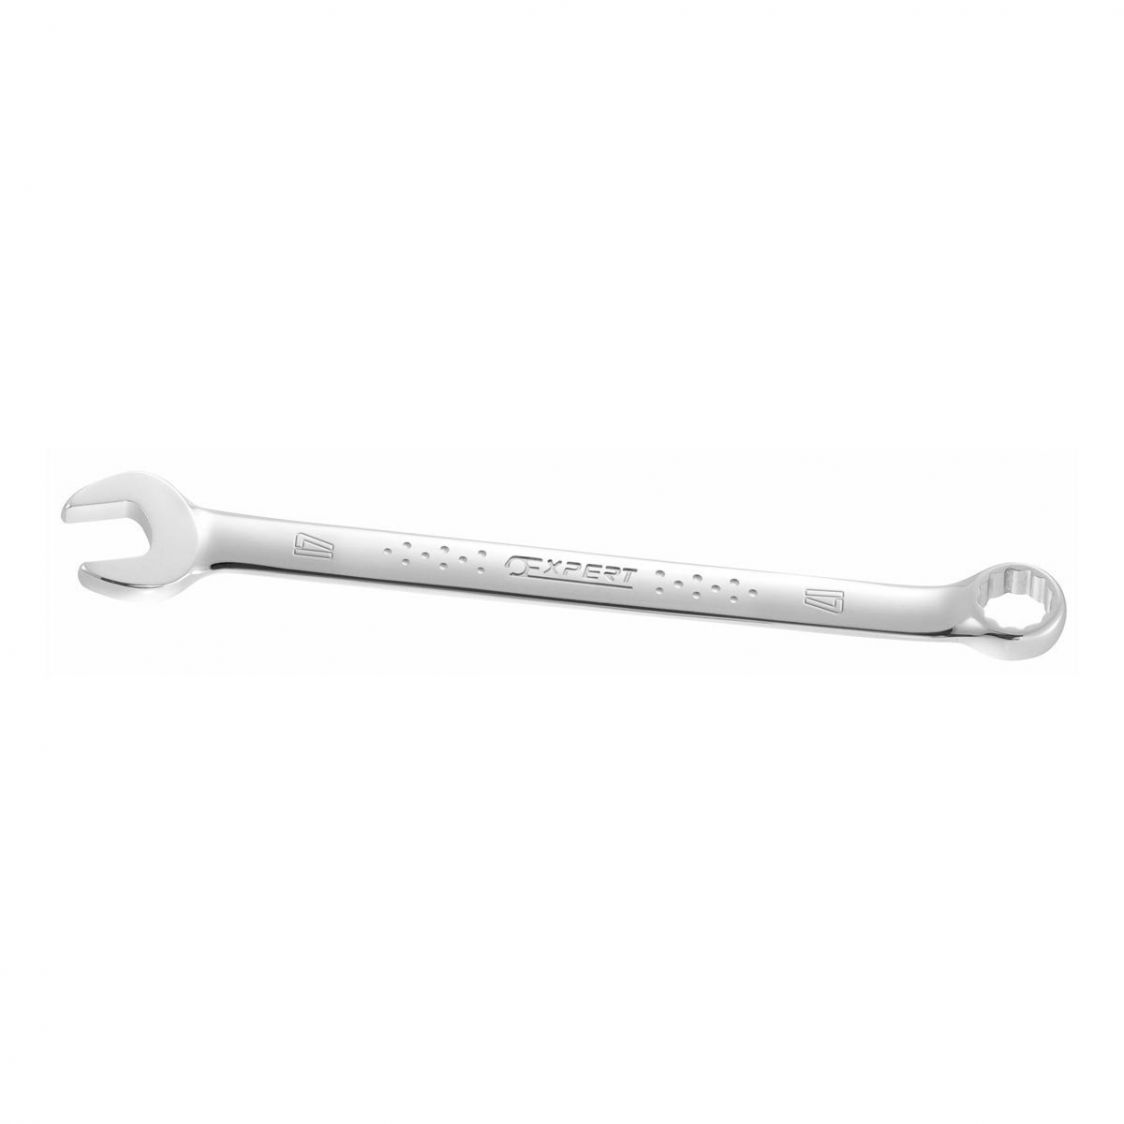 EXPERT by FACOM E117715 - 38mm Metric Long Combination Spanner